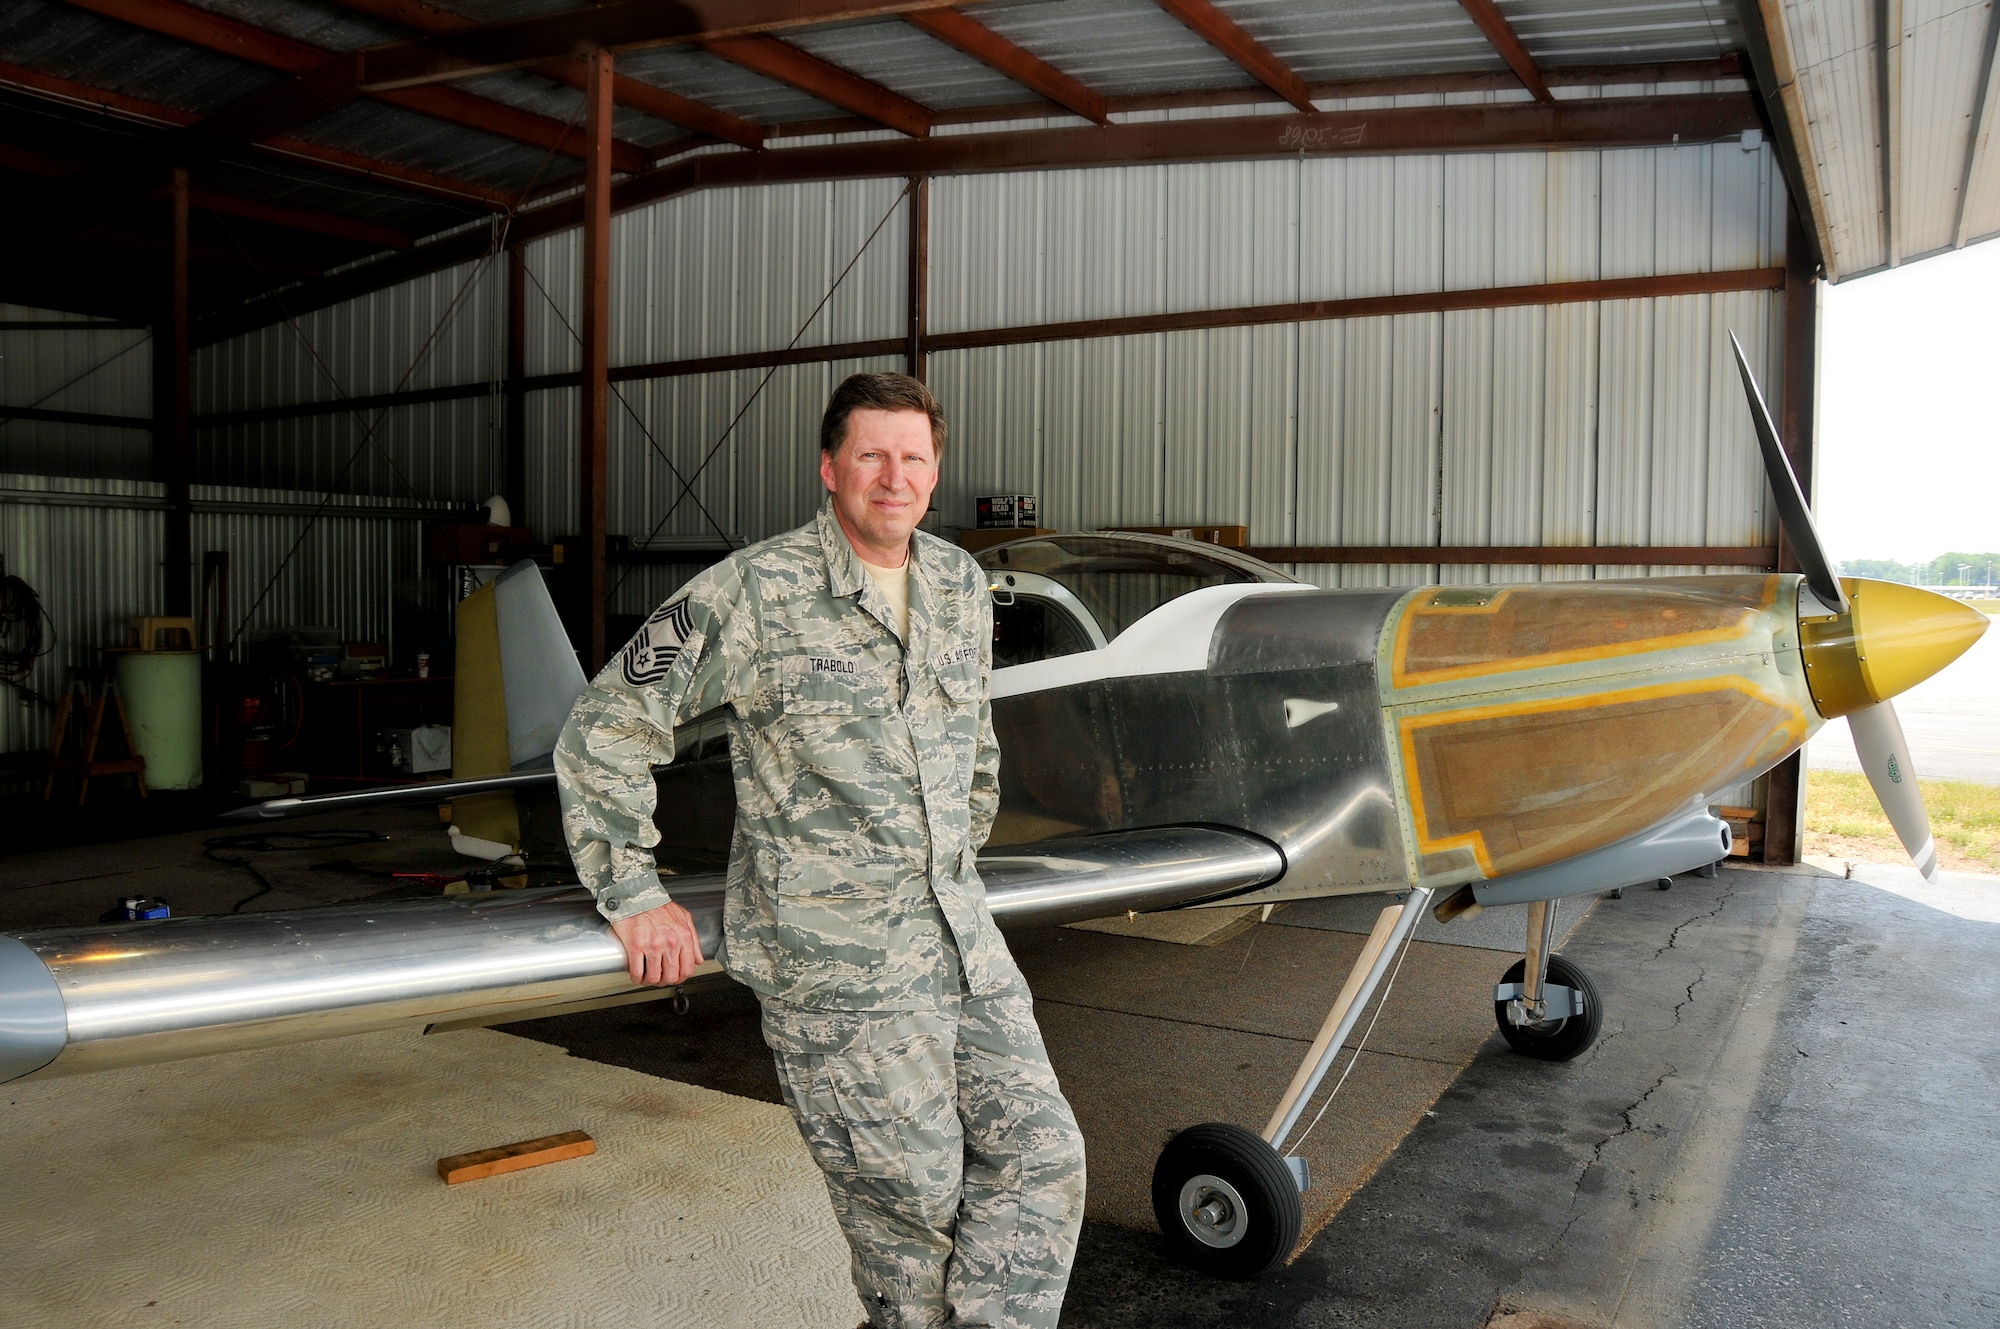 Chief Master Sgt. Jeff Trabold, 180th FW Airfield Operations Manager, pictured with his hand built Vans Aircraft RV-6. The aircraft took around 22 years to complete and was funded with Chief Trabold’s guard checks. Photo by Staff Sgt. Nicholas Kuetemeyer, Public Affairs (Released).